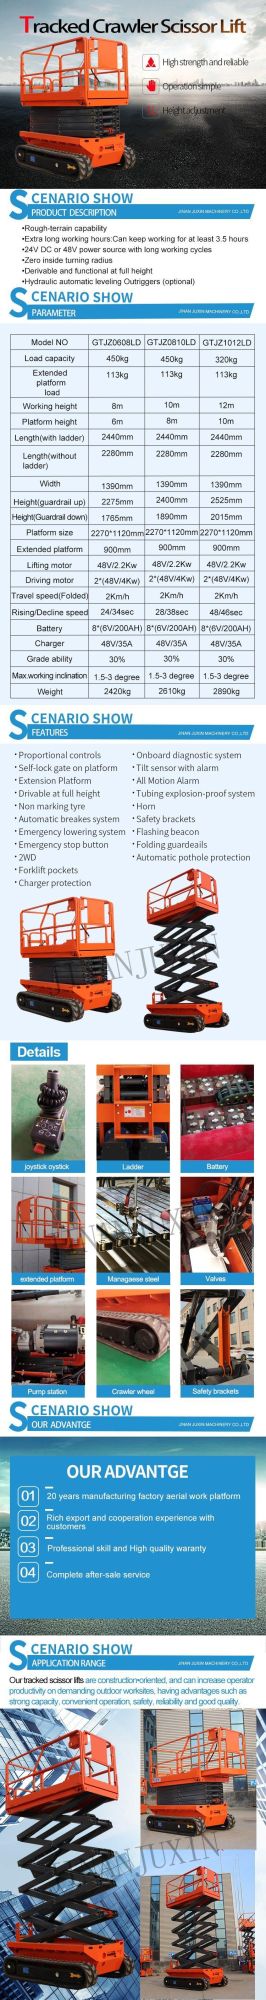 Wholesale Diesel Engine Tracked Self Propelled Scissor Lift with 10m Height